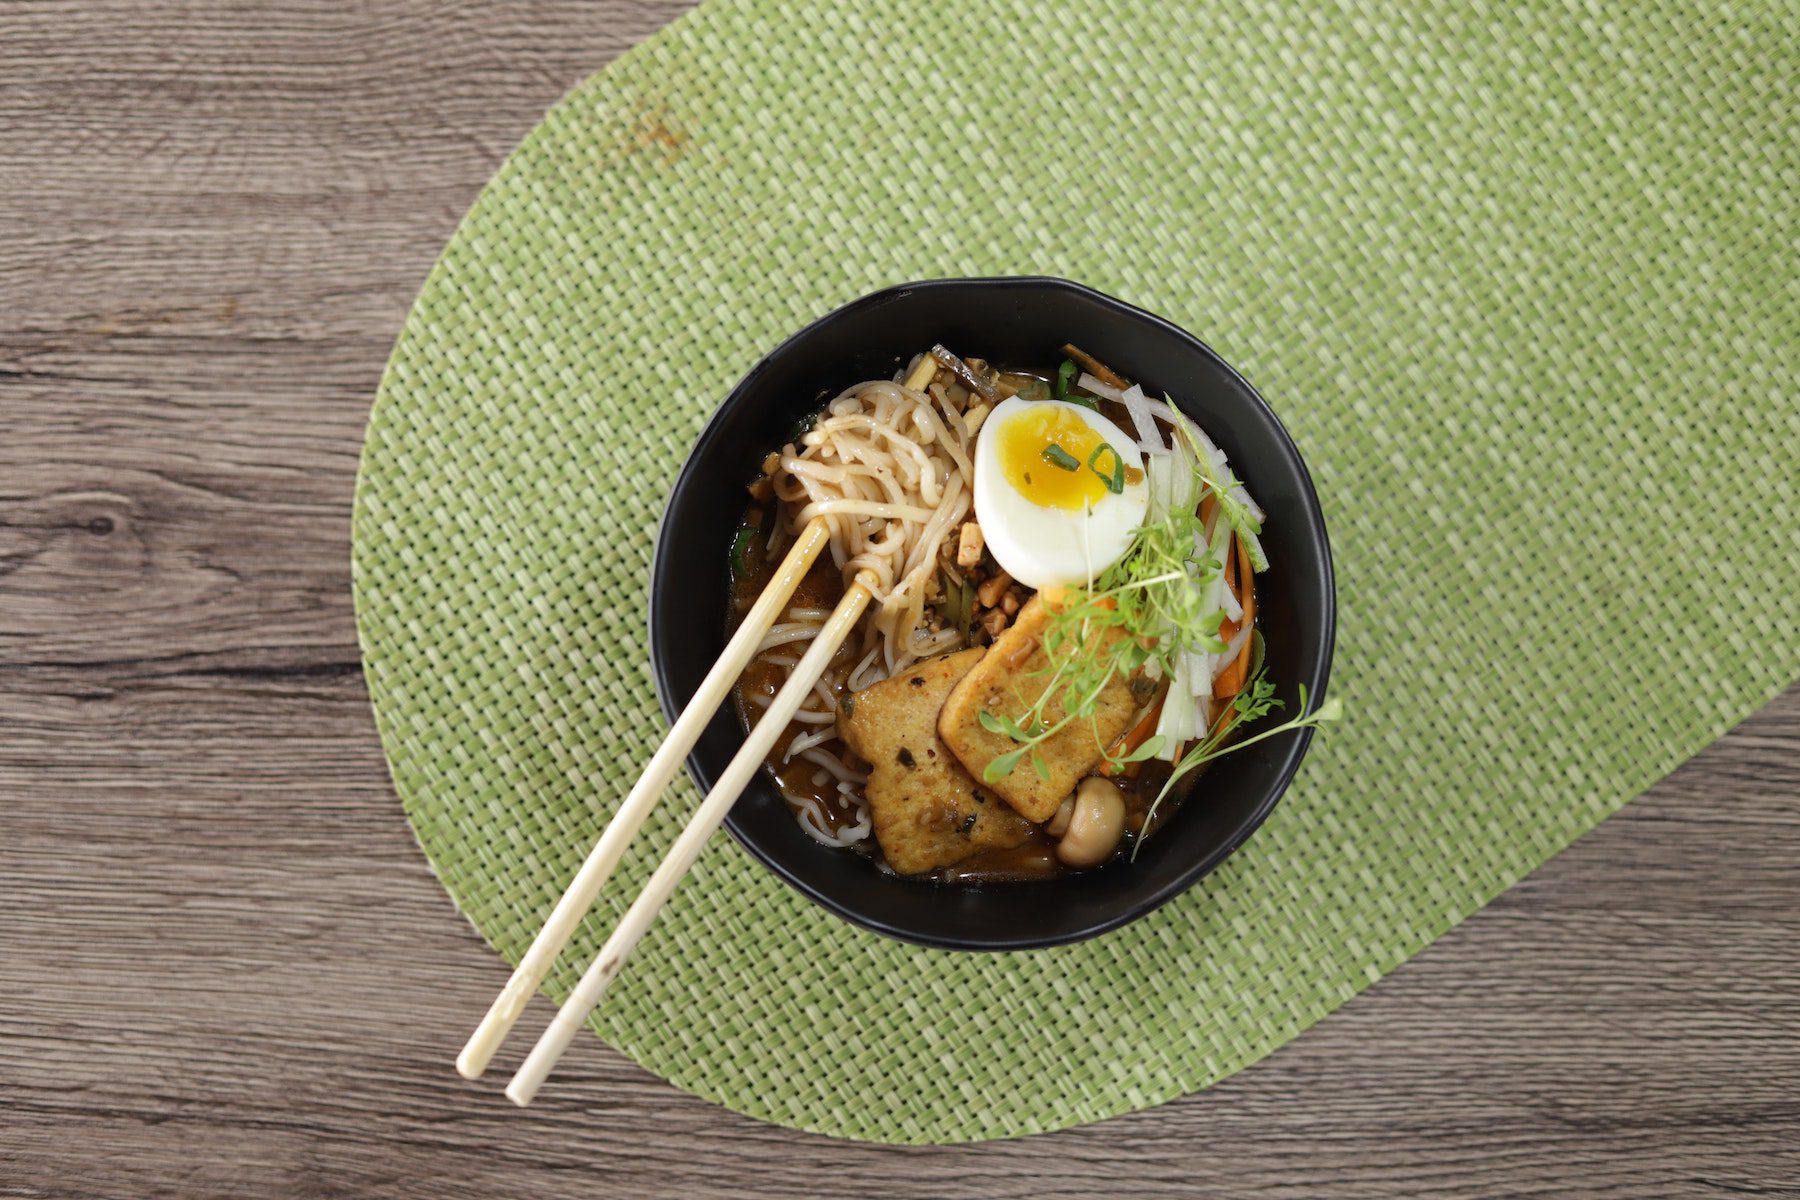 Bowl of ramen or other thin noodles with hardboiled egg, leeks, button mushrooms and tofu with chopsticks on woven green mat.